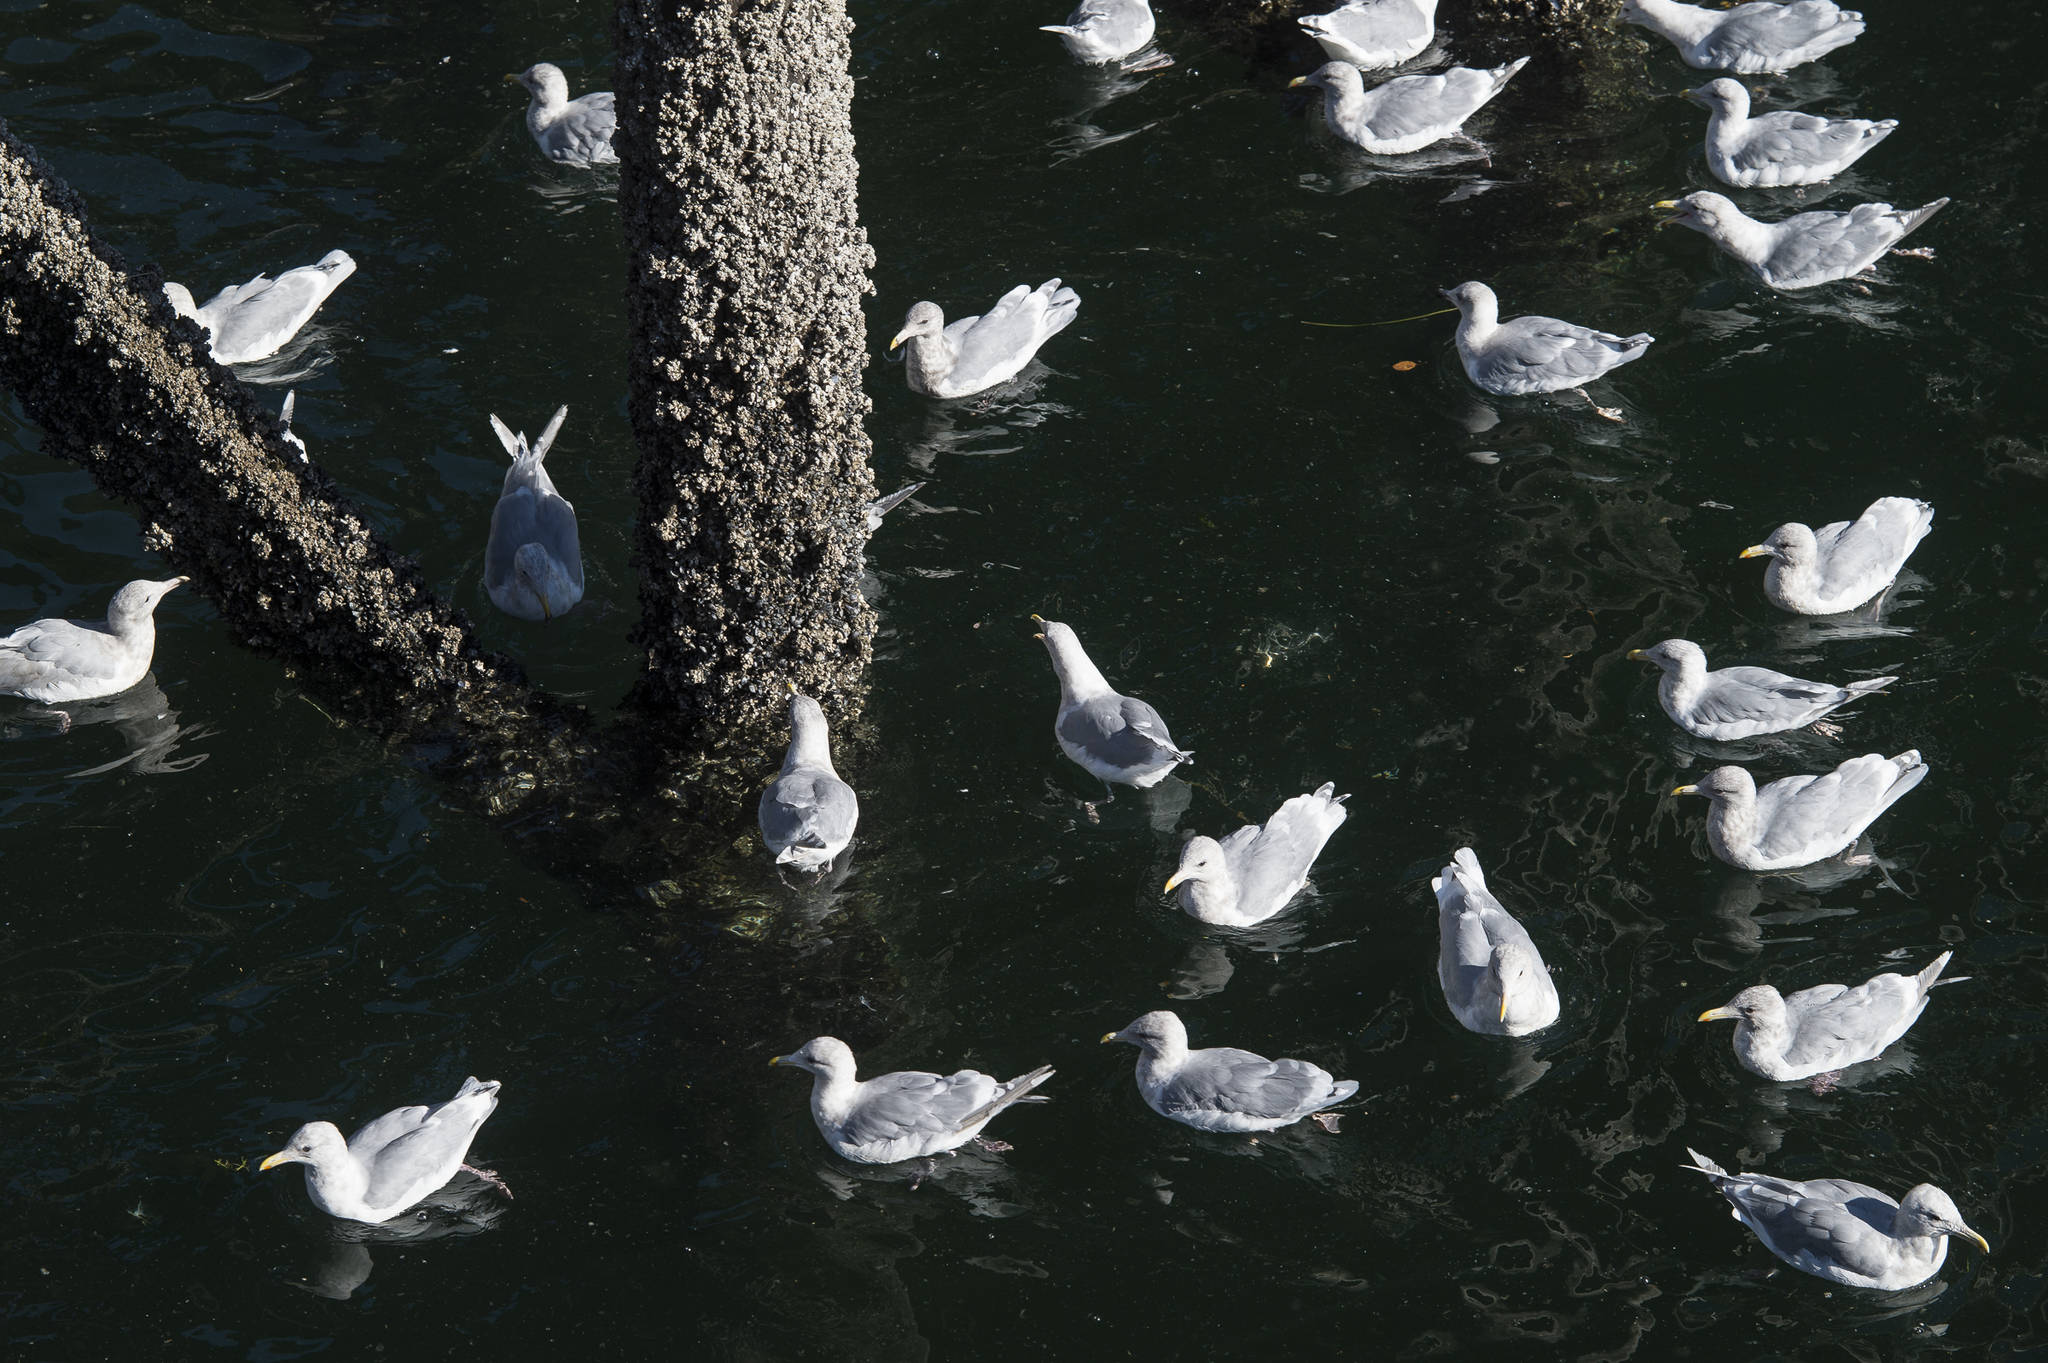 Glaucous winged gulls feed on mussels off pilings downtown on Monday, Sept. 17, 2018. (Michael Penn | Juneau Empire)